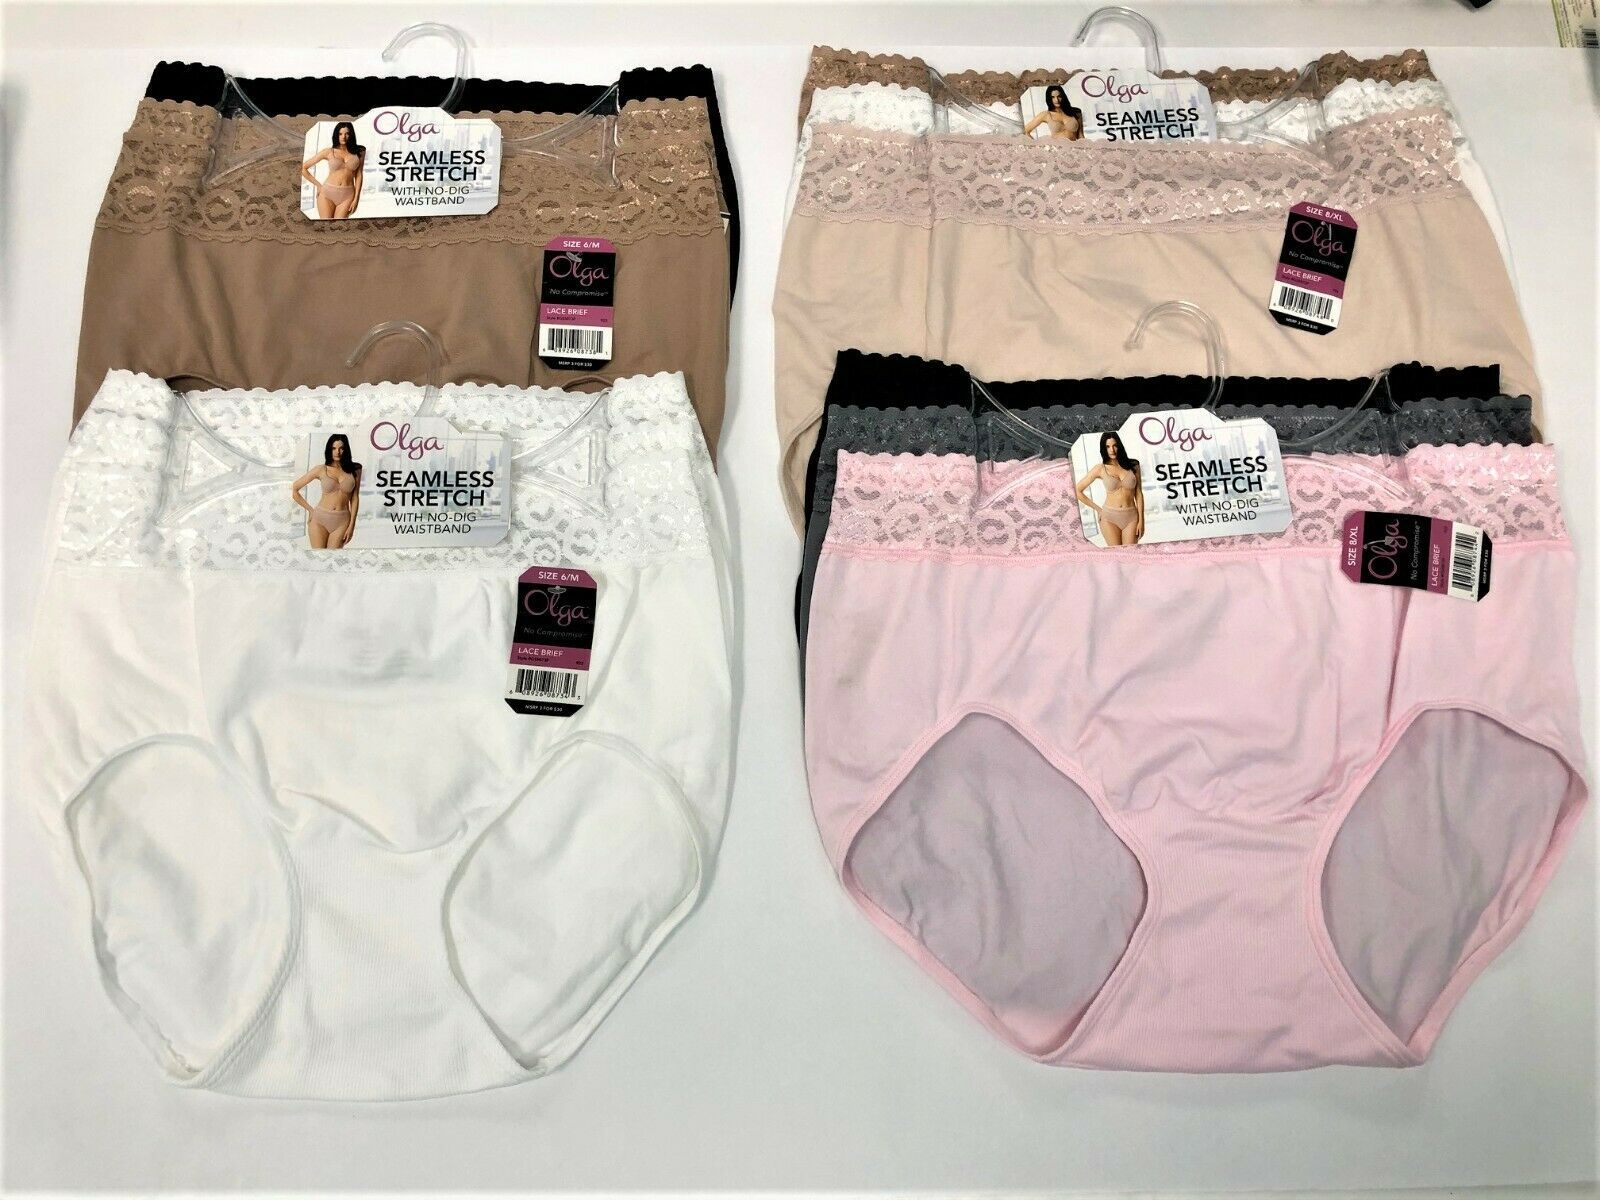 Olga No Compromise Seamless Stretch No Dig Waistband Lace Briefs Panties 3  Pair